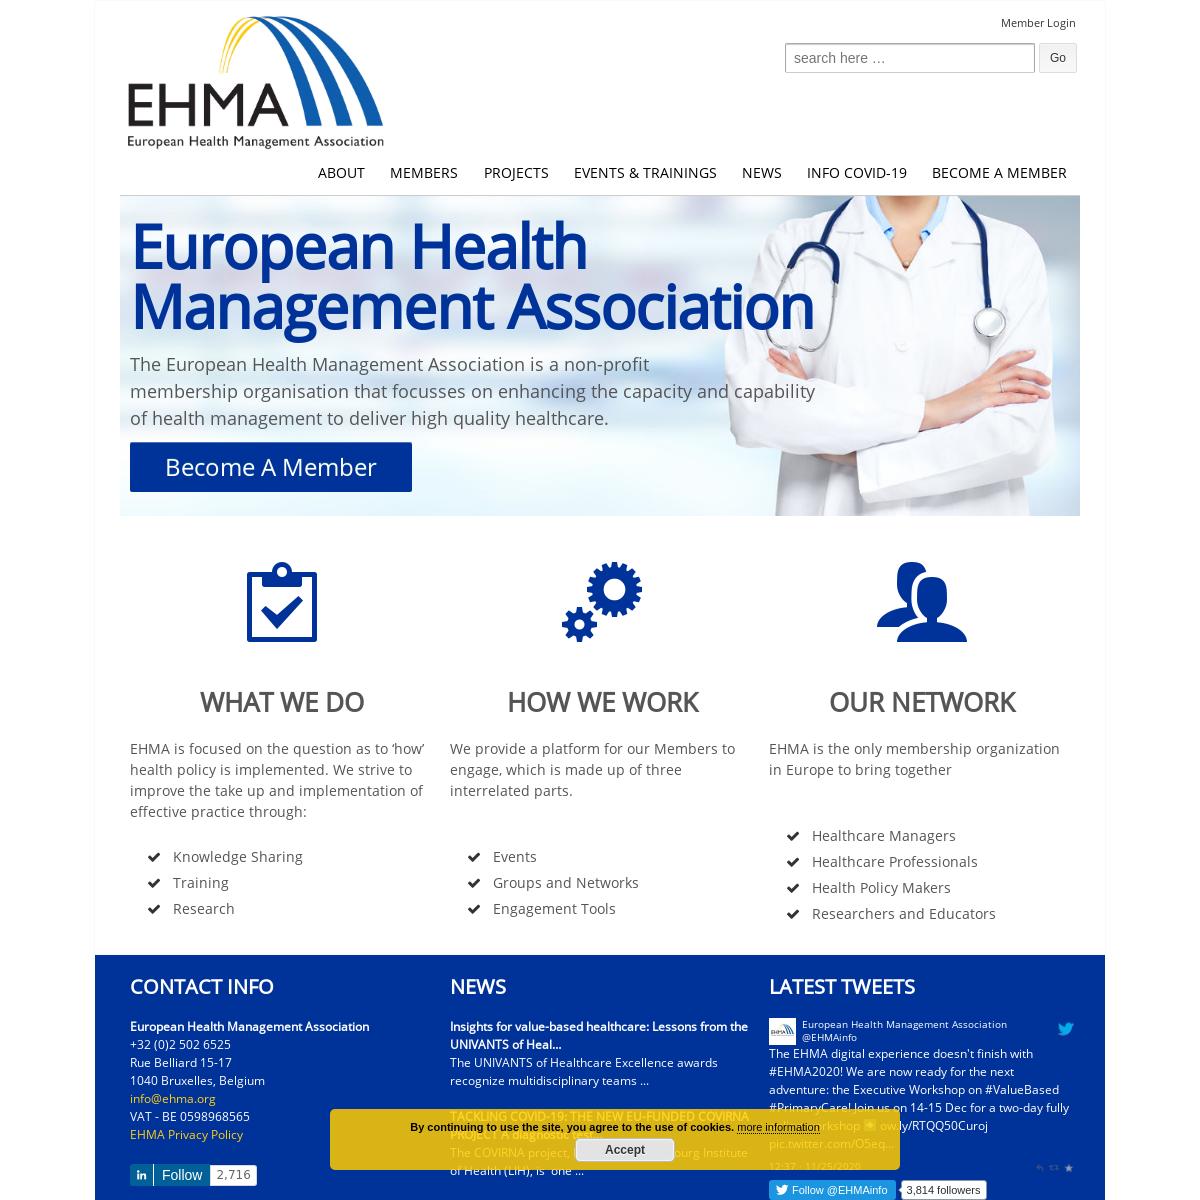 A complete backup of ehma.org